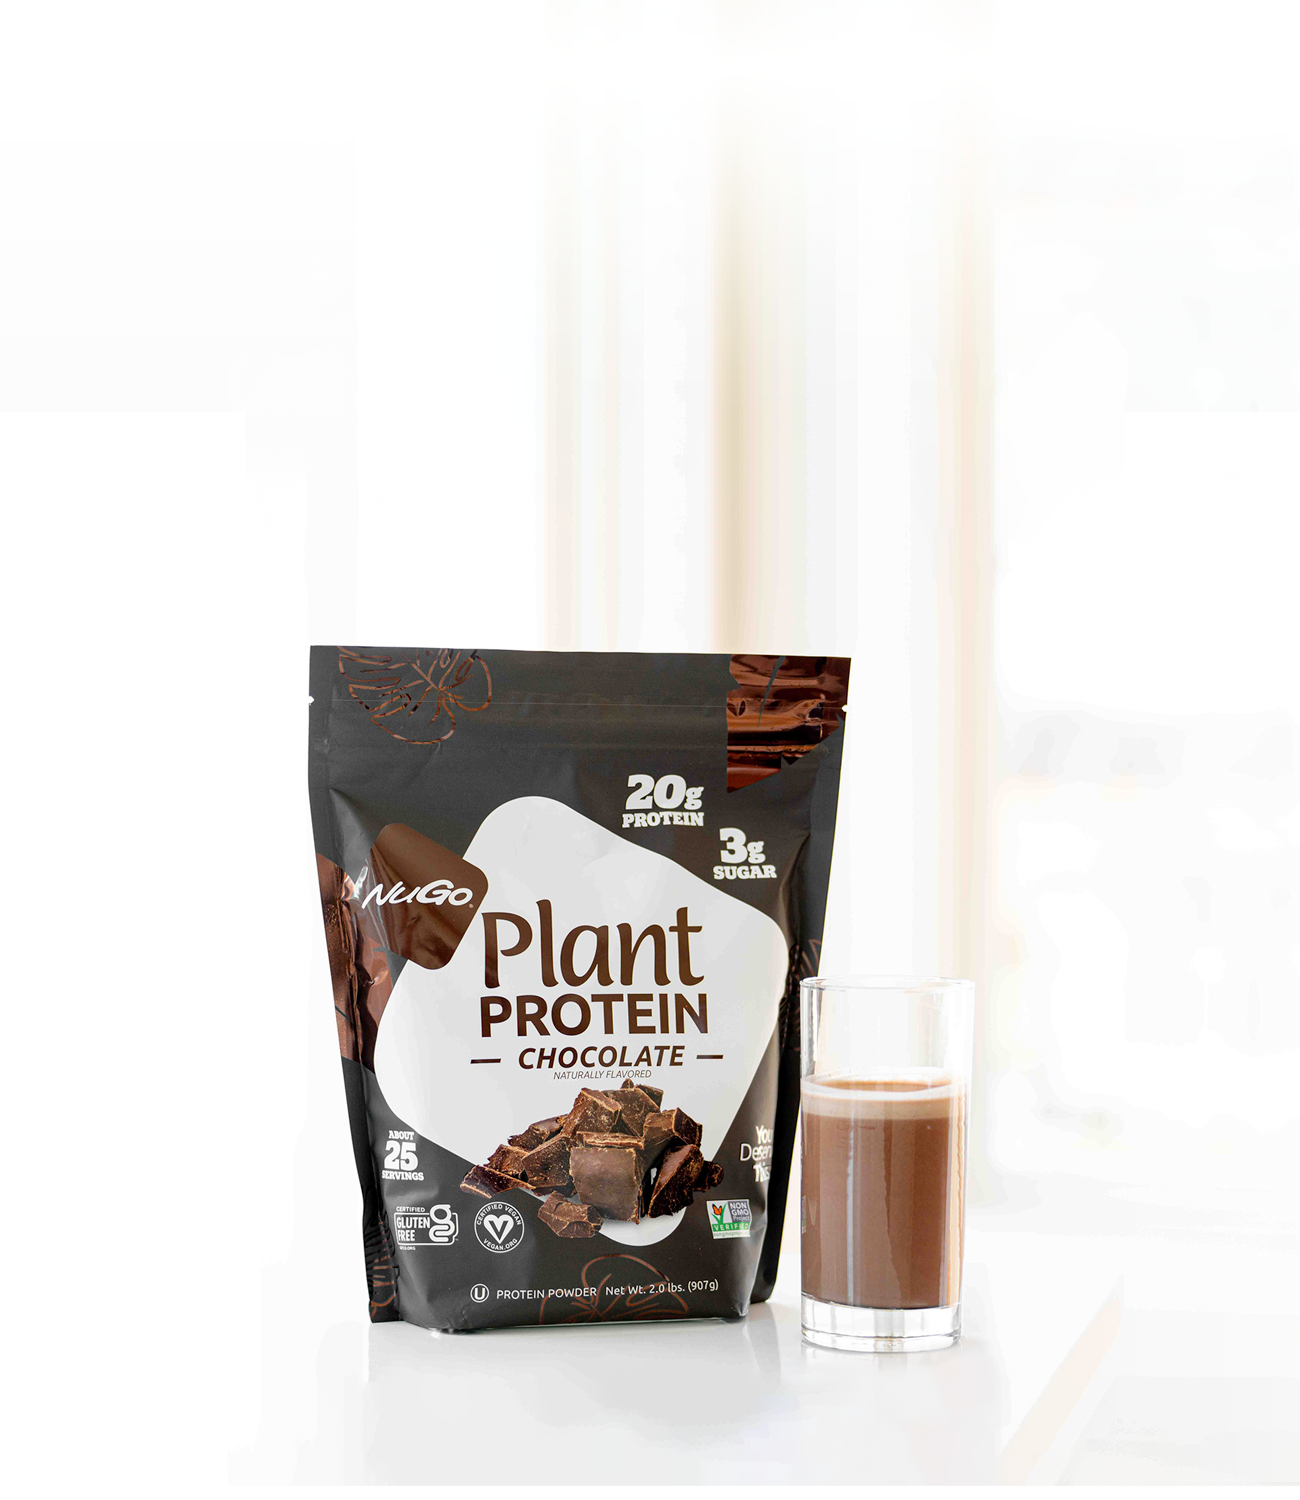 NuGo Protien Powder Chocolate next to tall glass with product inside